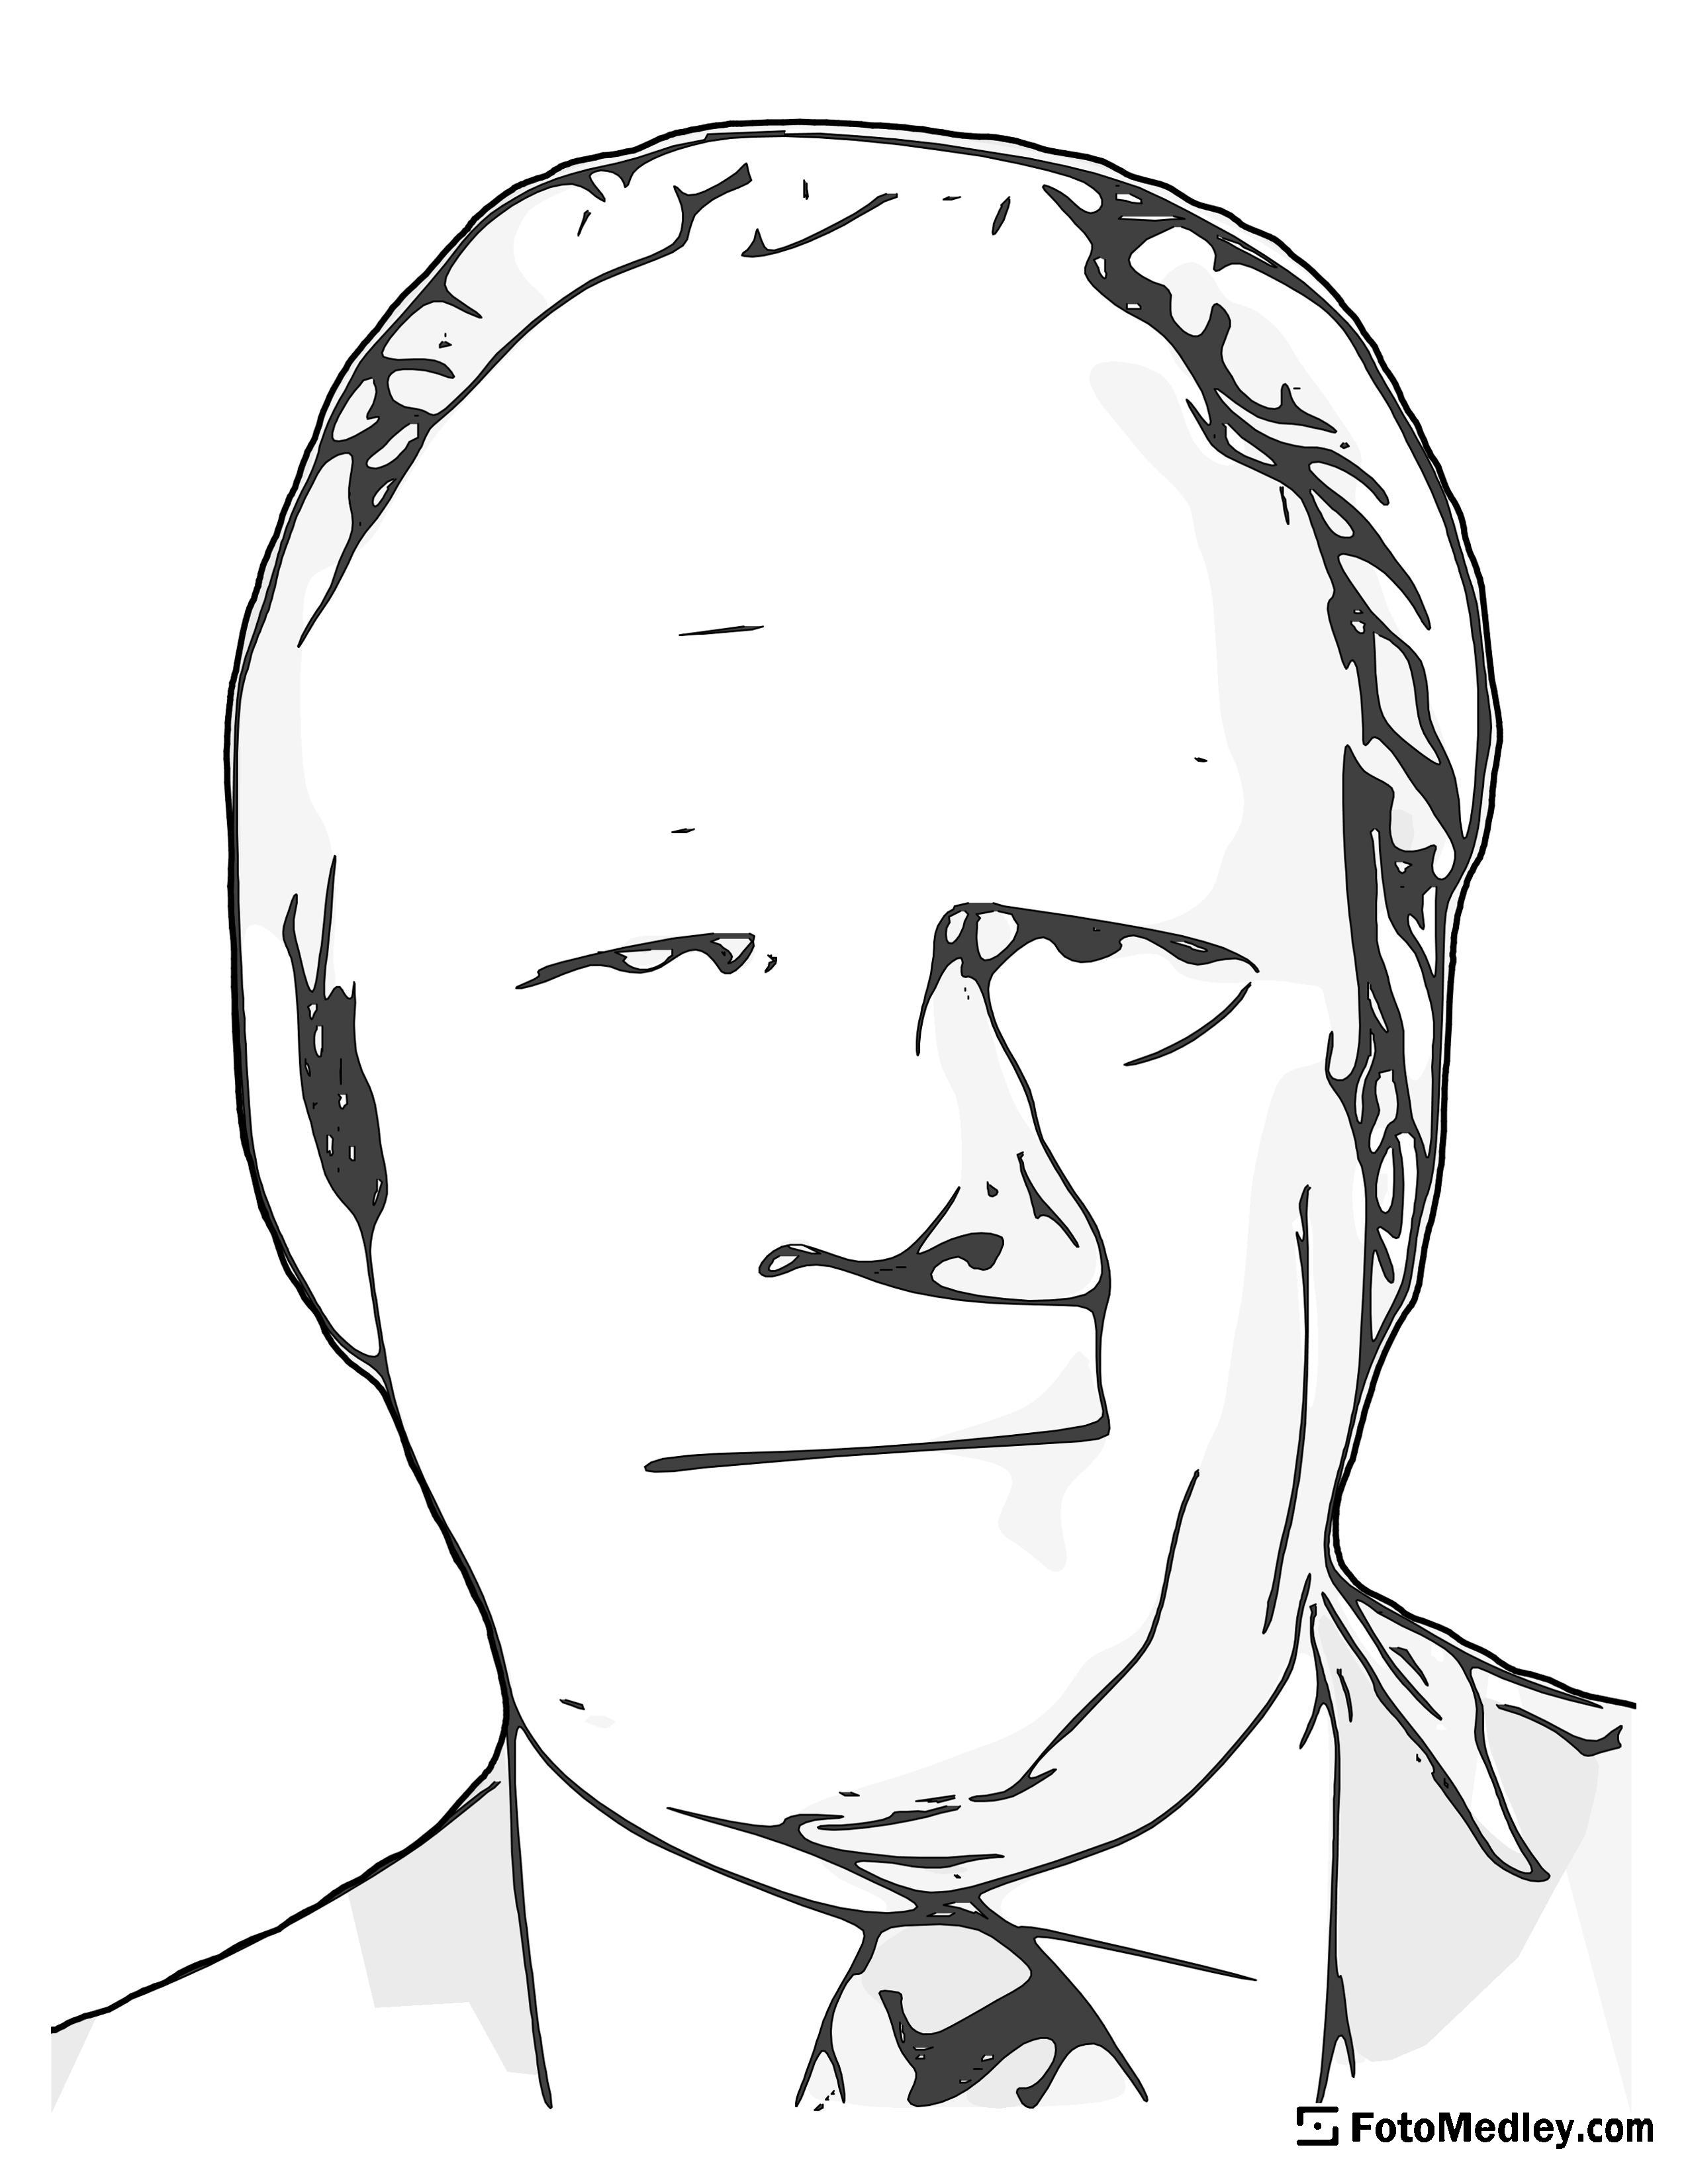 A cartoon style coloring sketch of Gerald R. Ford, 38th President of the United States.